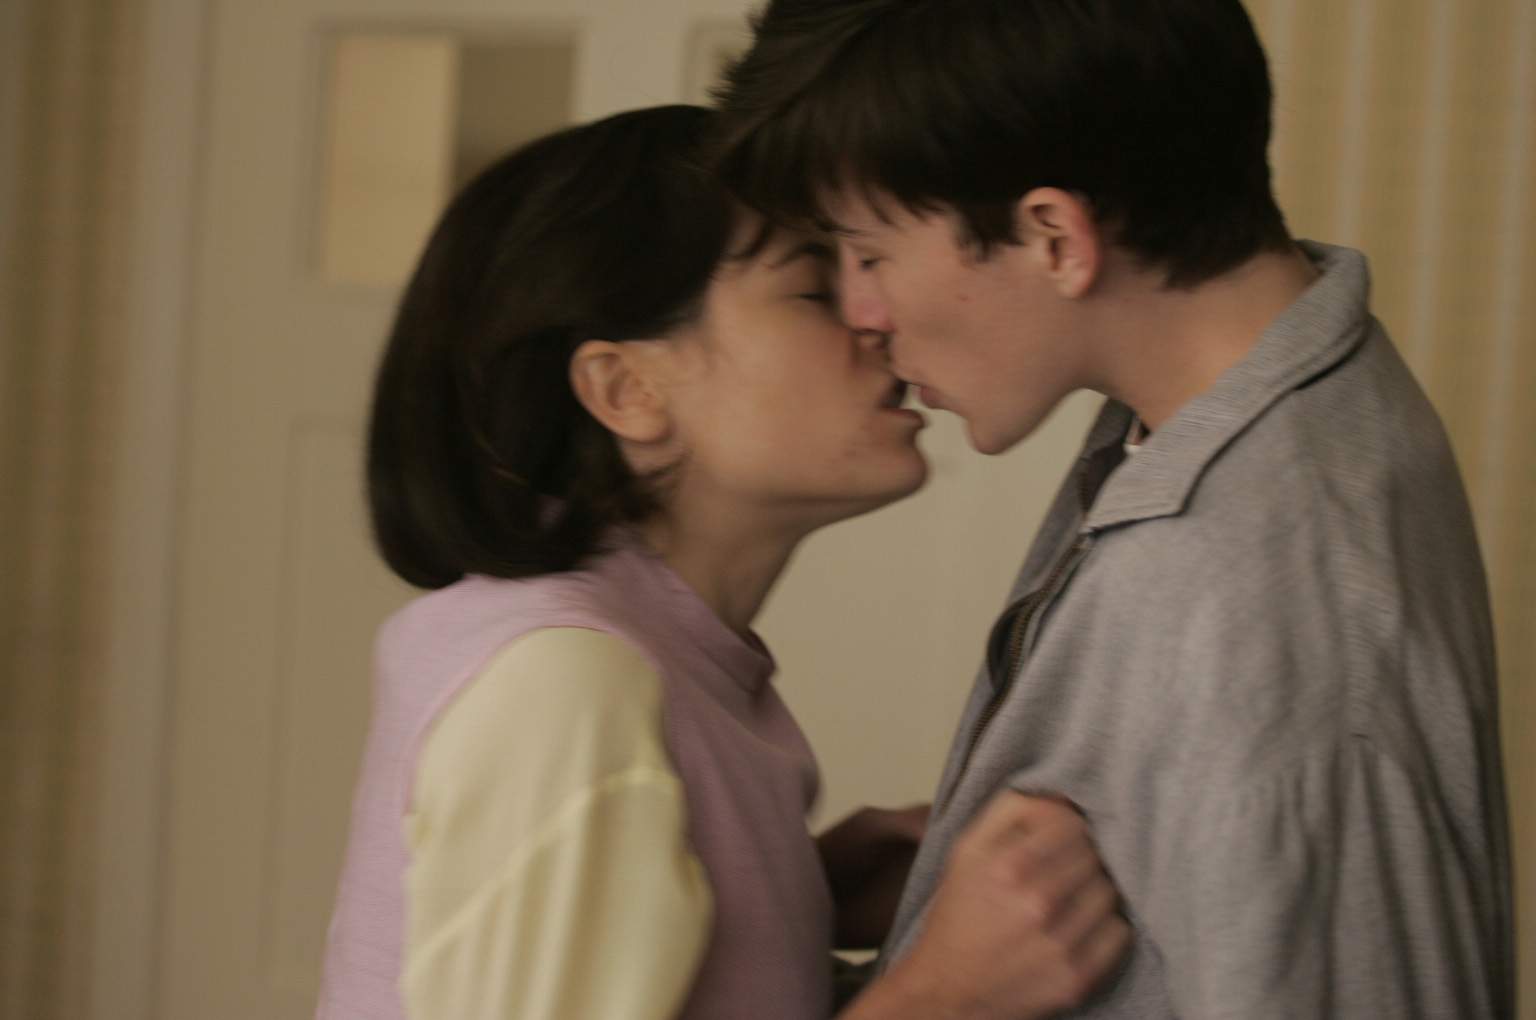 Elaine Cassidy as Sandra and Matthew Beard as young Blake Morrison in Sony Pictures Classics' When Did You Last See Your Father? (2007).